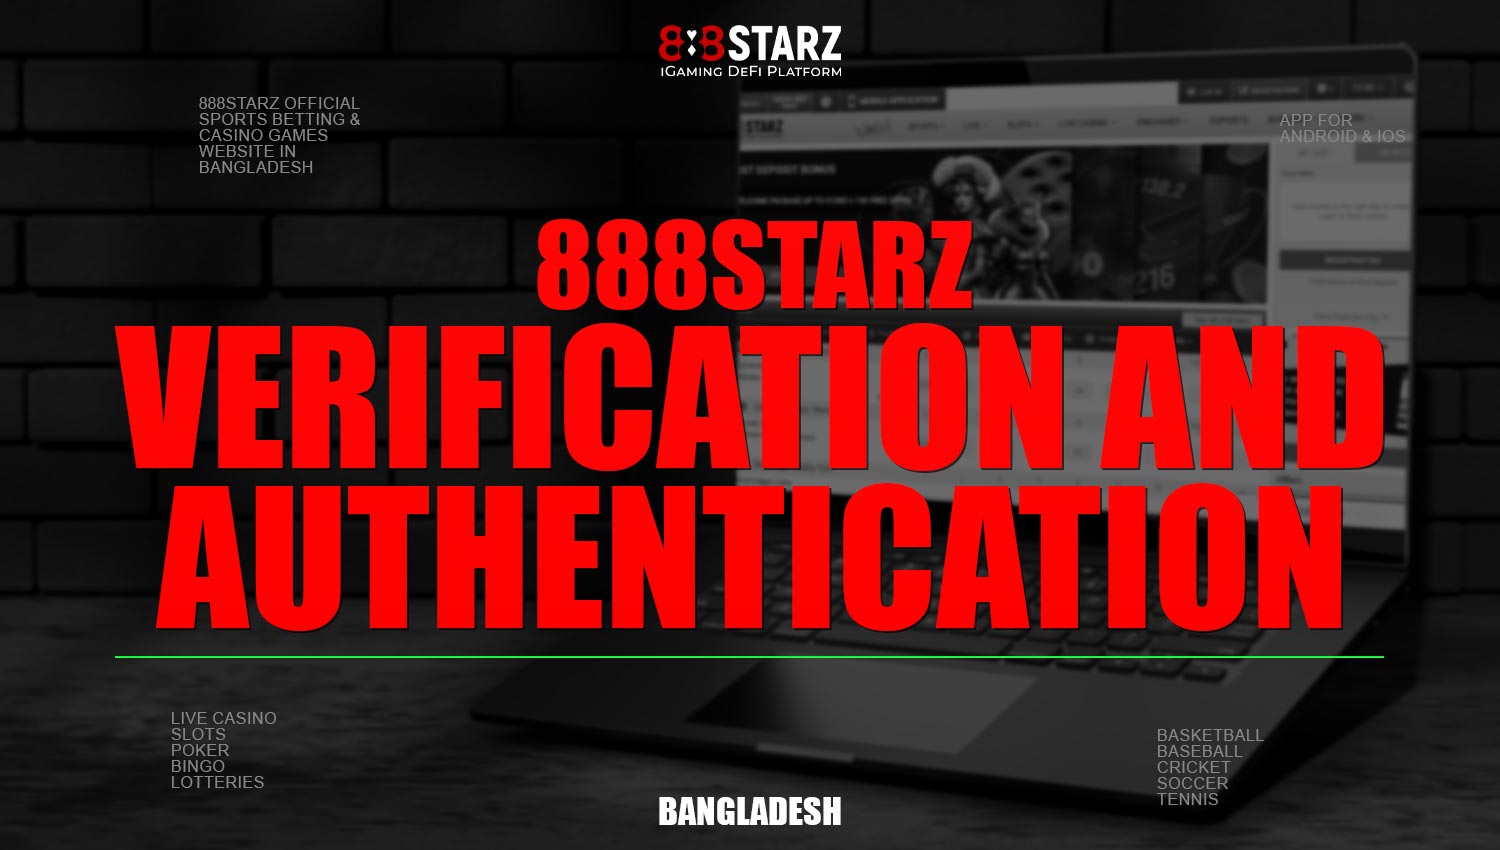 Guide to verification and authentication on the 888Starz platform.